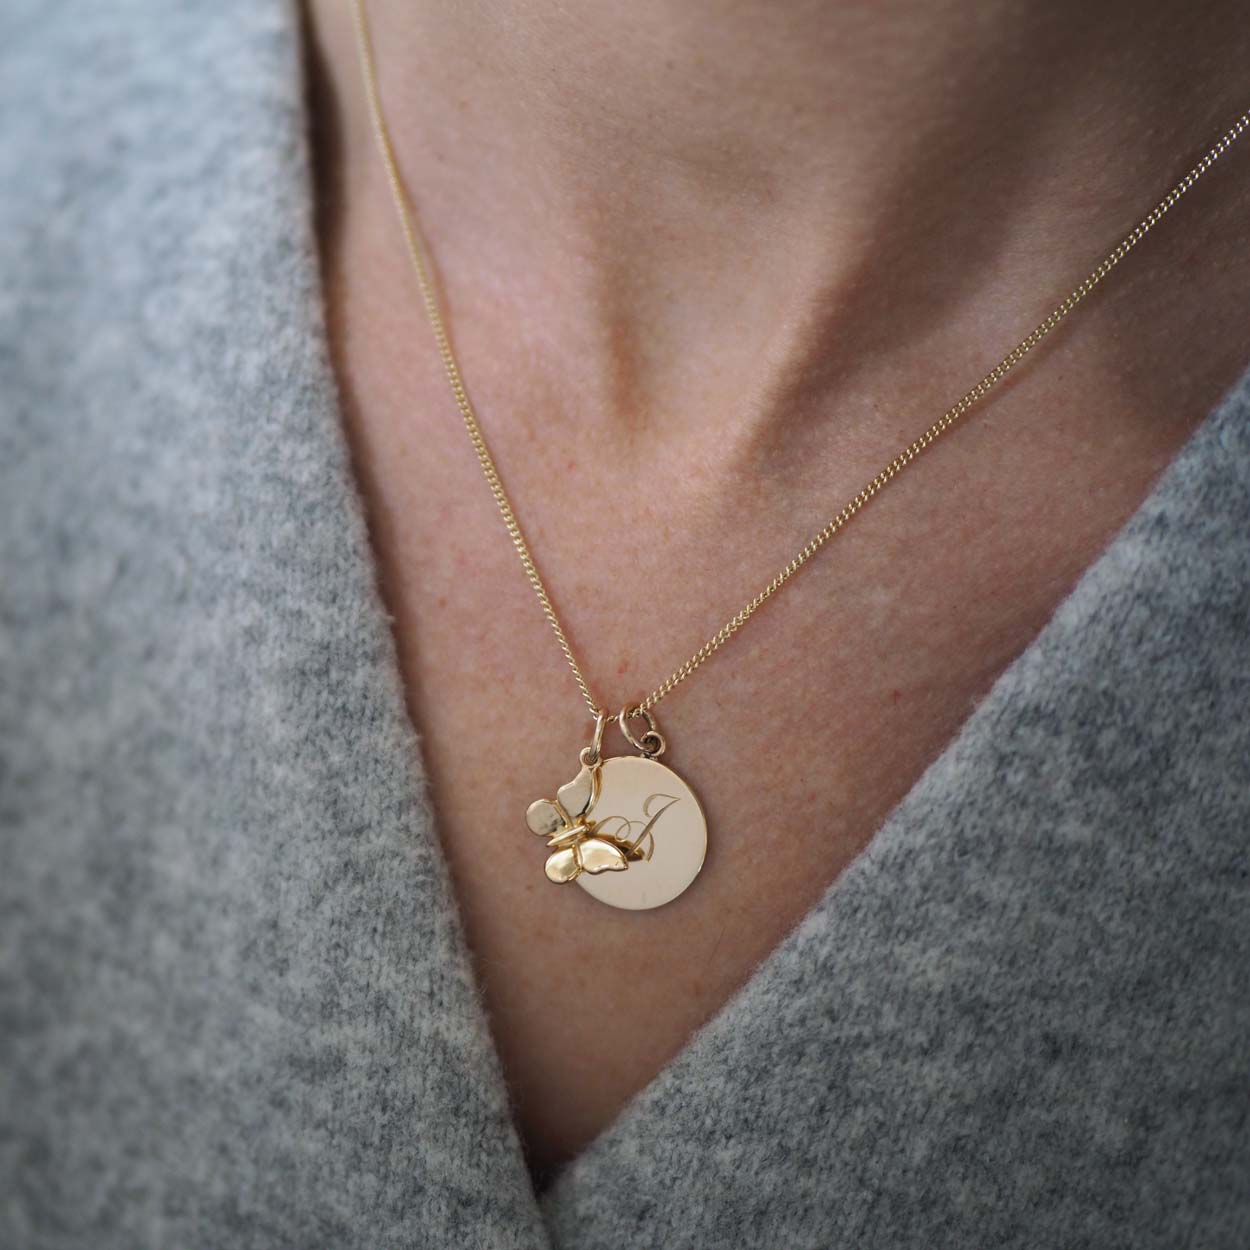 Bianca Jones handmade solid 9ct gold butterfly charm featuring intricate detailing is seen on a chain with a hand-engraved initial disc charm in rose, white, or yellow gold.